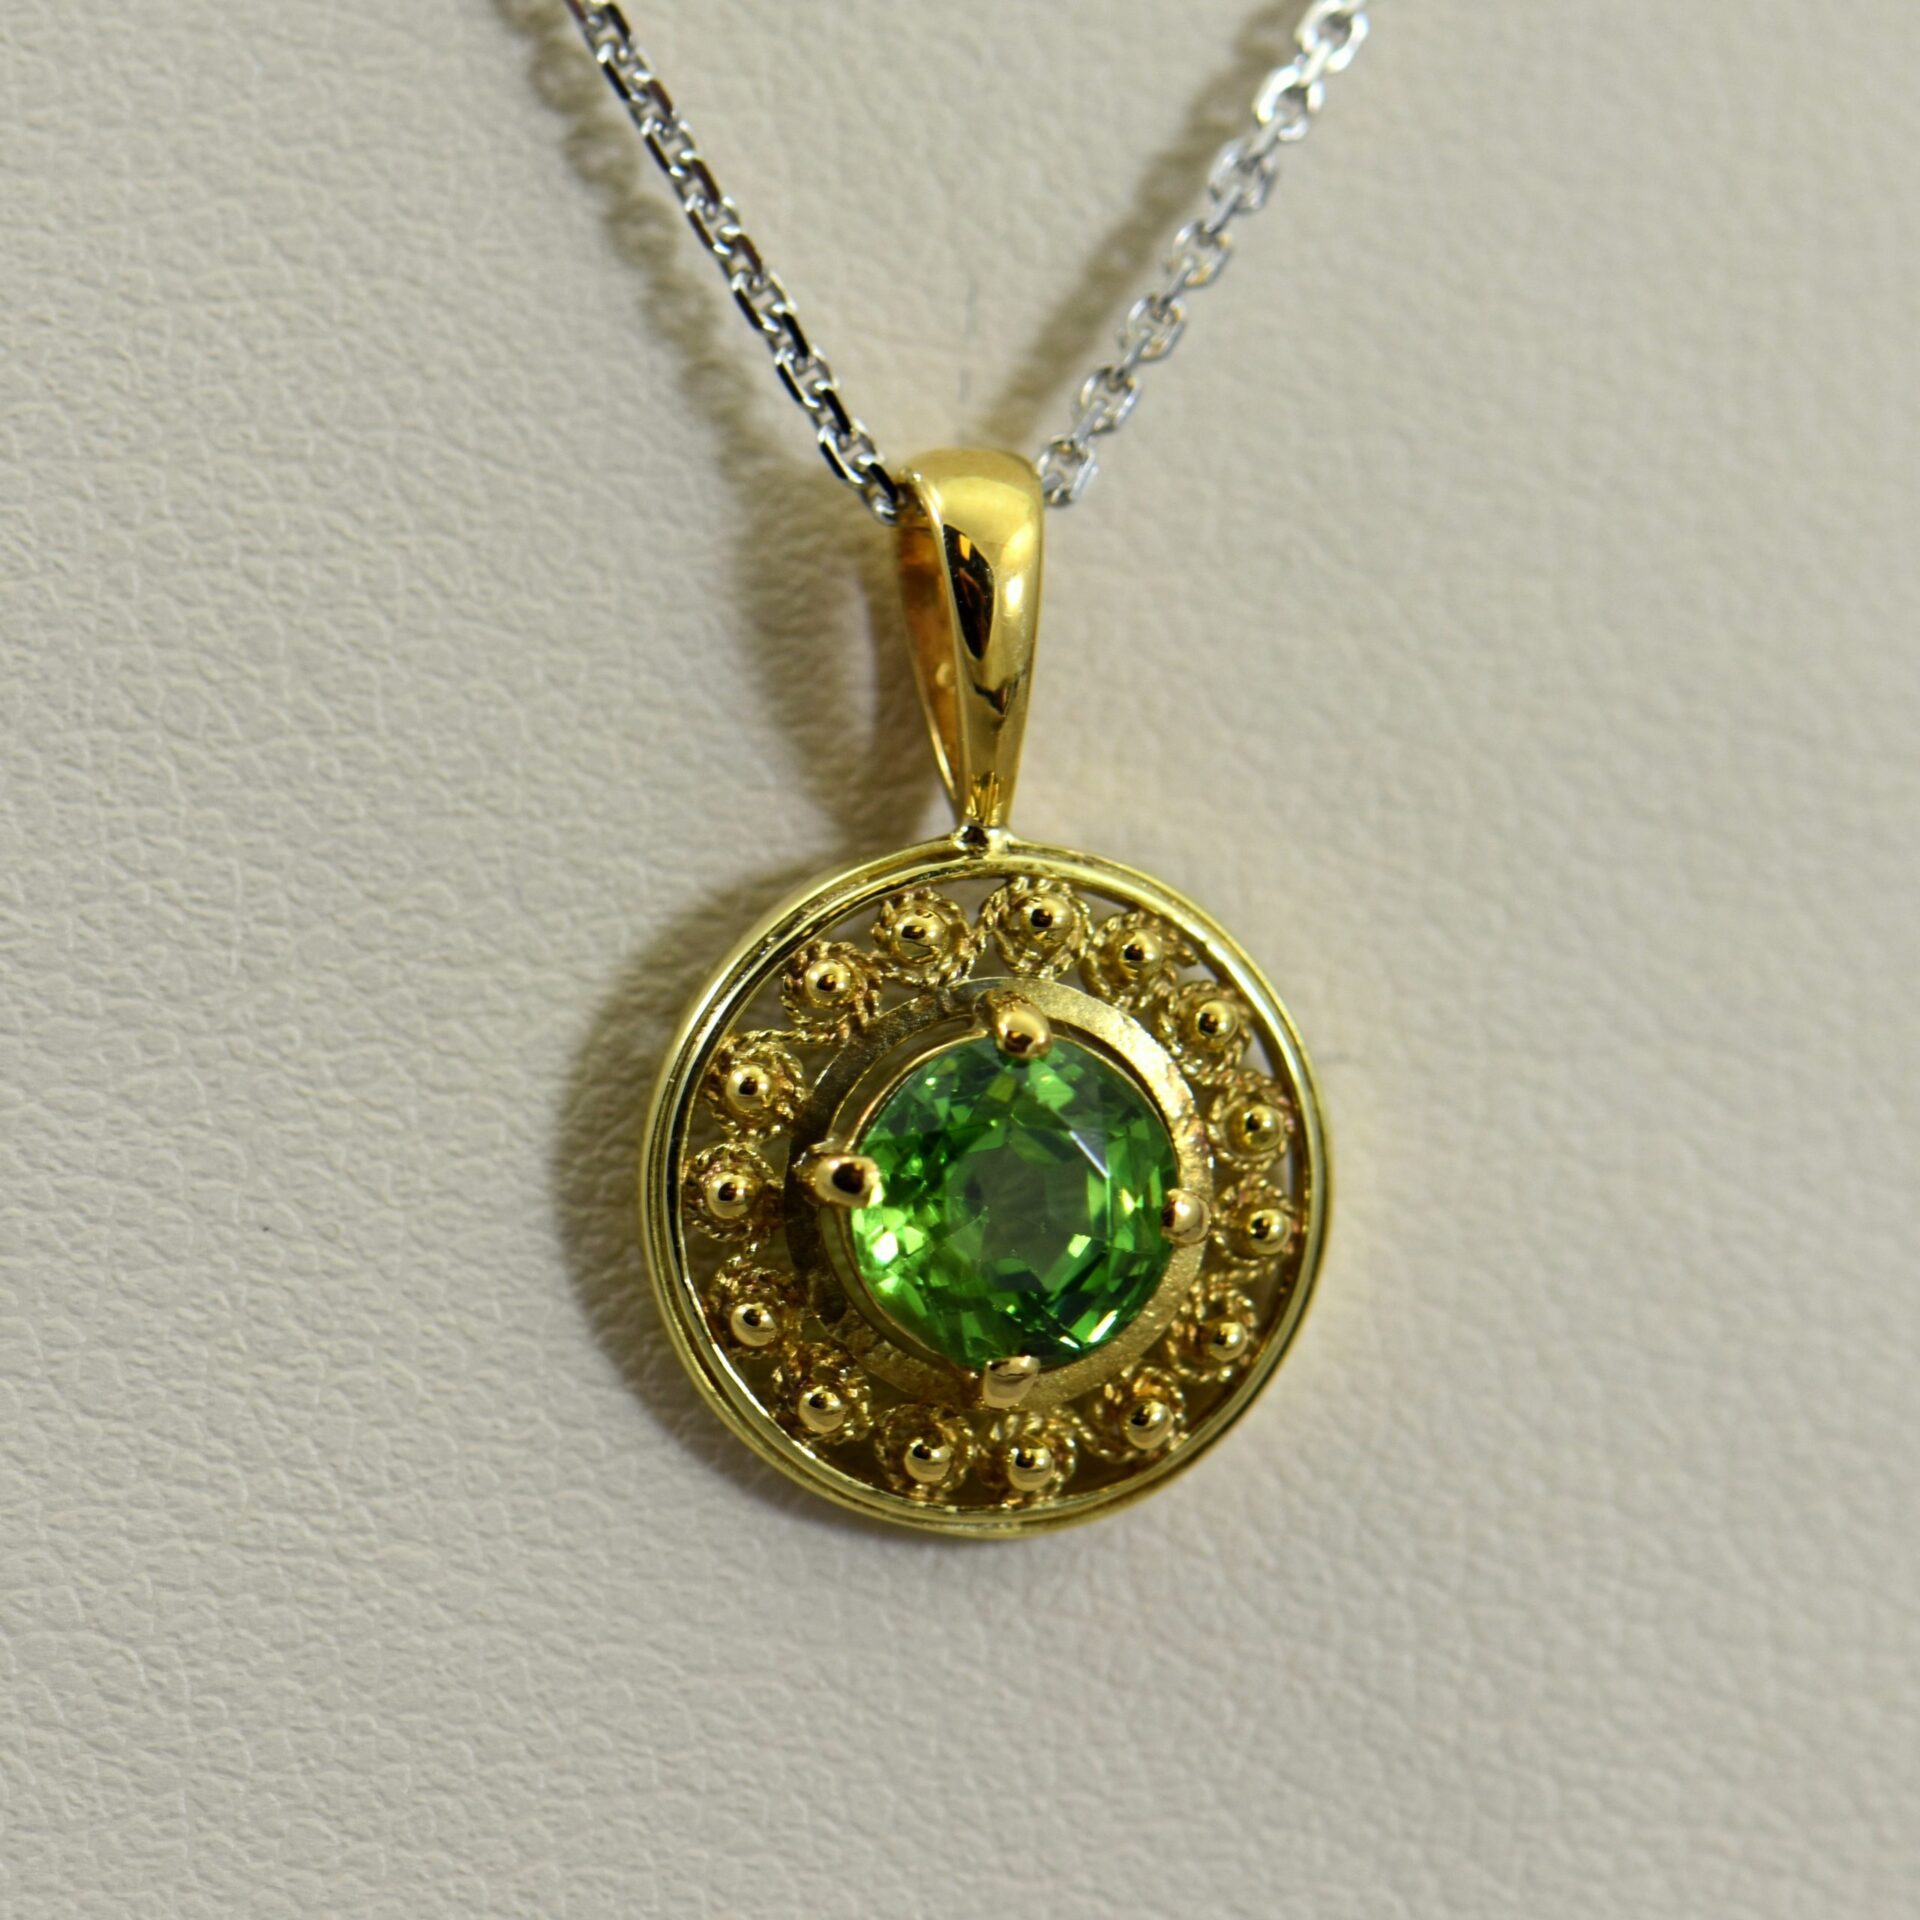 Pendant with Demantoid Garnet and Cannetille gold work | Exquisite ...